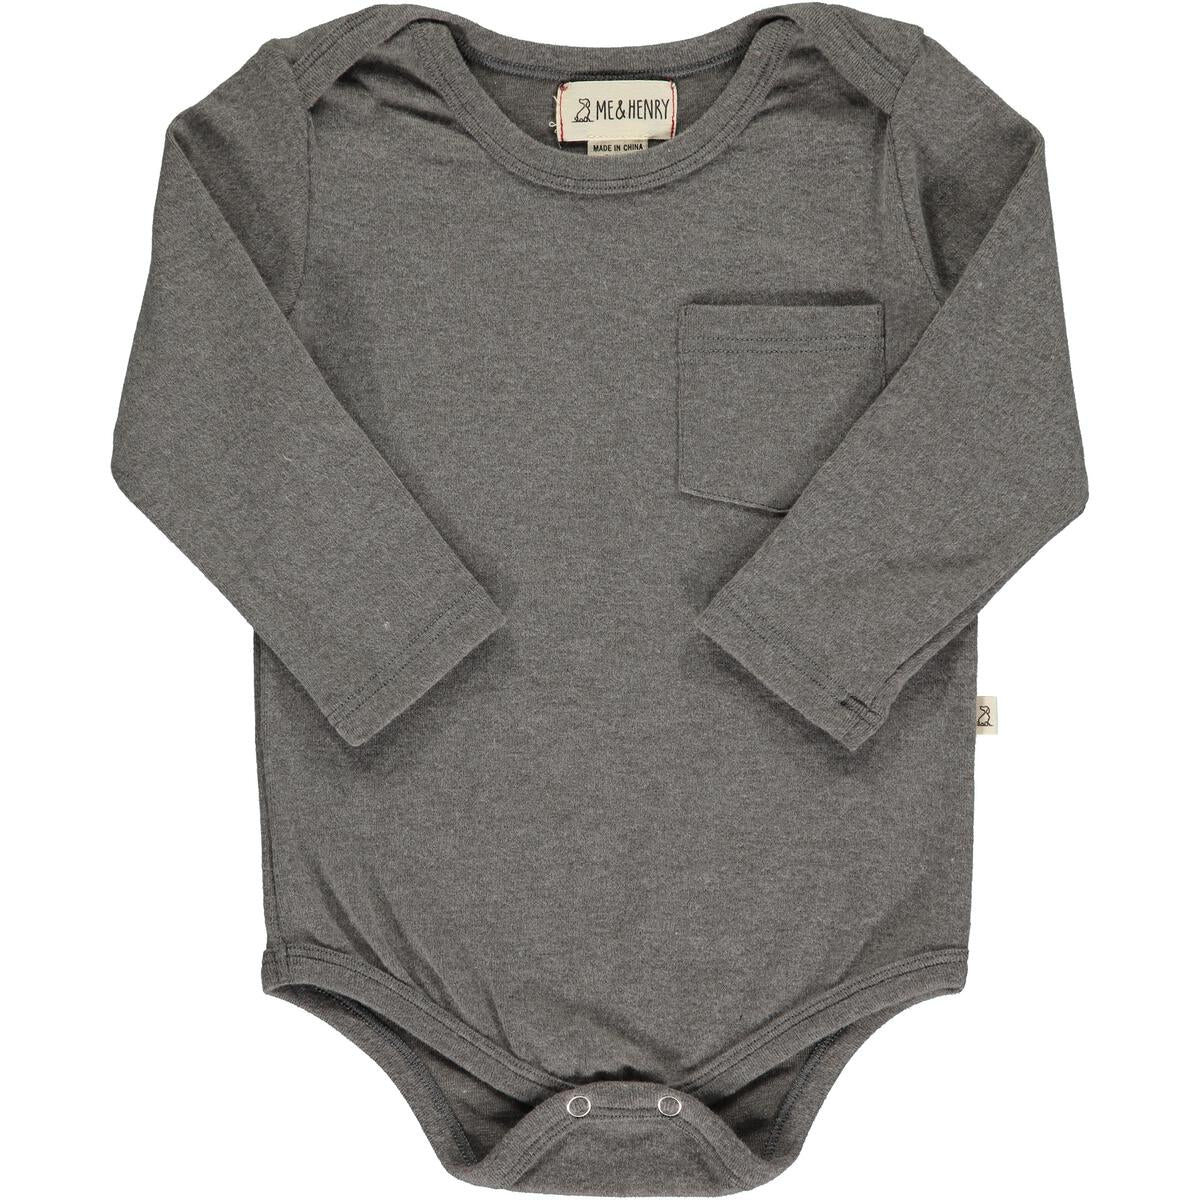 Charcoal Long Sleeve Pocket Basic.  Sizes 0-3 Months through 9-12 Months onesie style. Button snap closure.   Sizes 12-18 Months + 18=24 Months shirt style.   100% Cotton. 